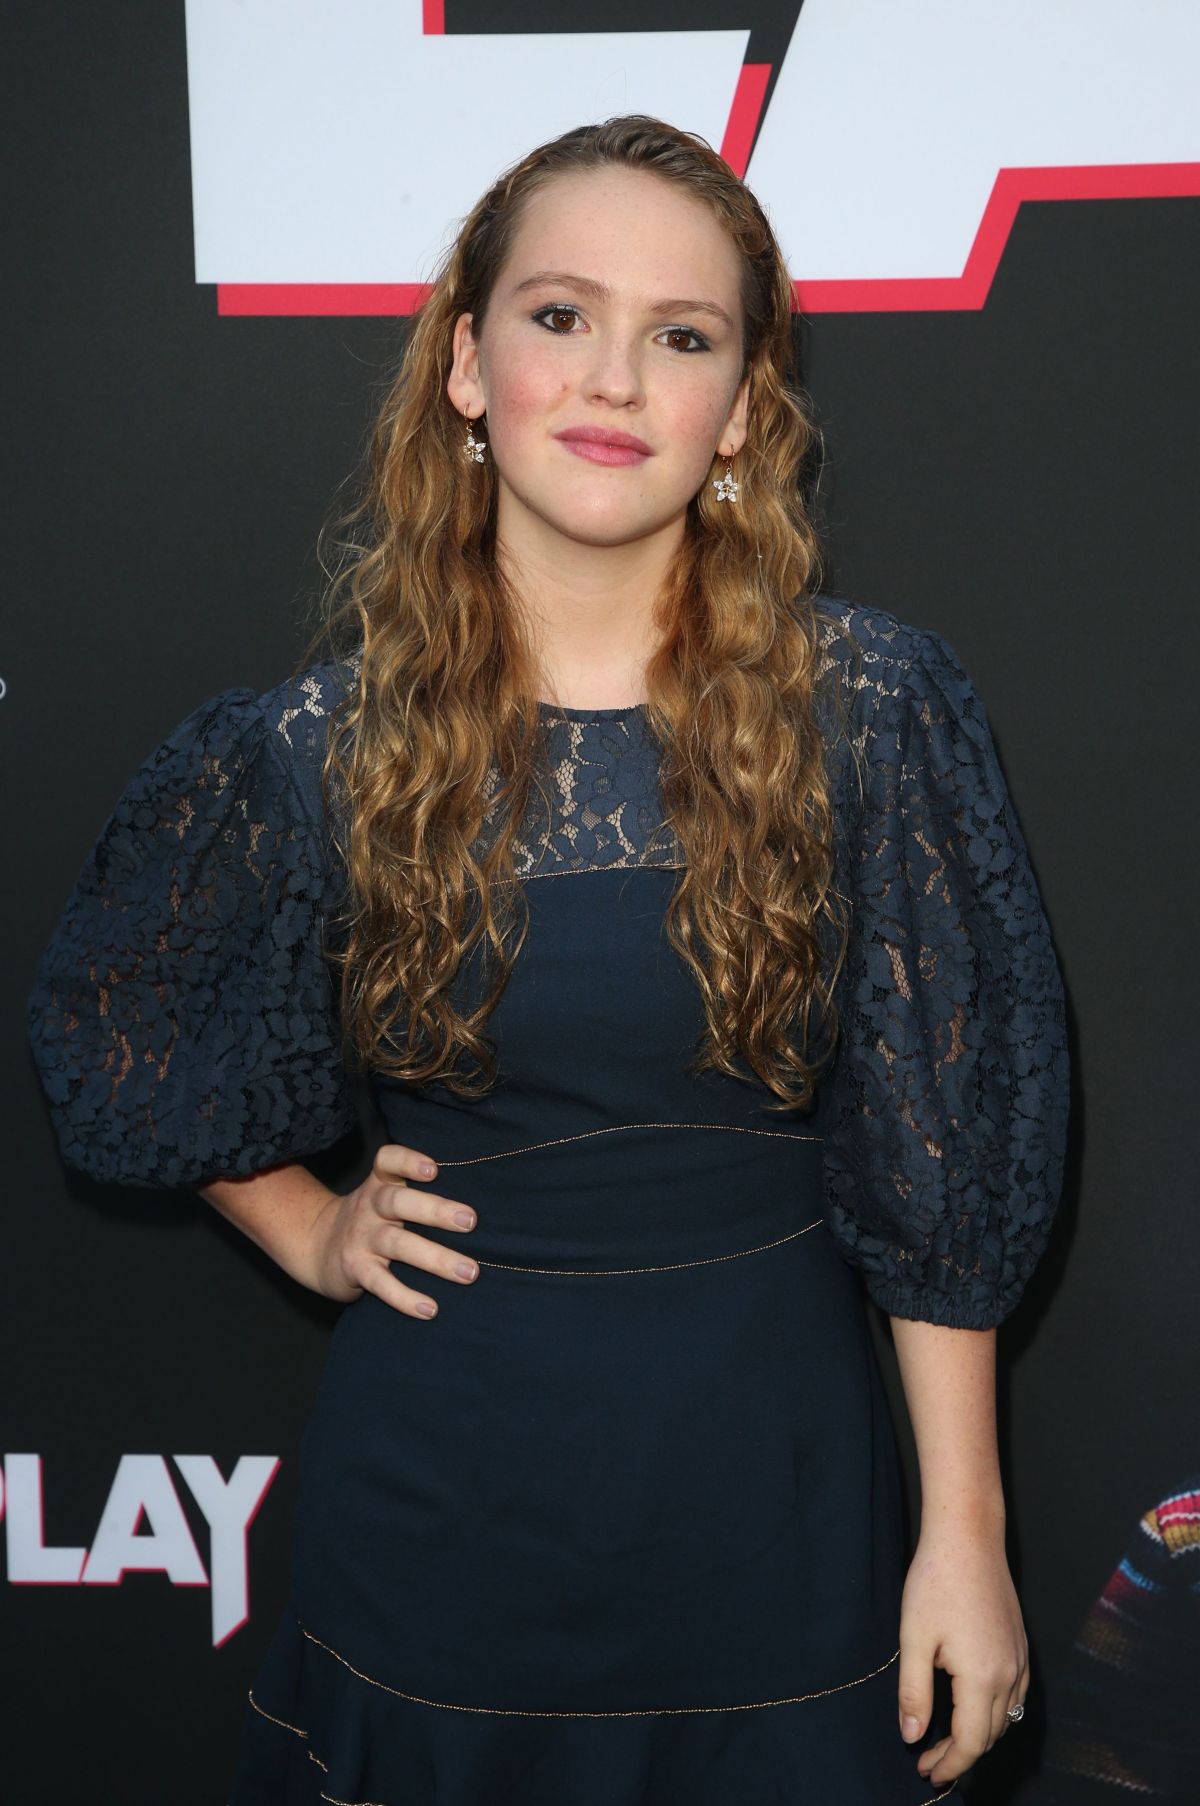 TALITHA BATEMAN at Child’s Play Premiere in Hollywood 06/19/2019 – HawtCelebs